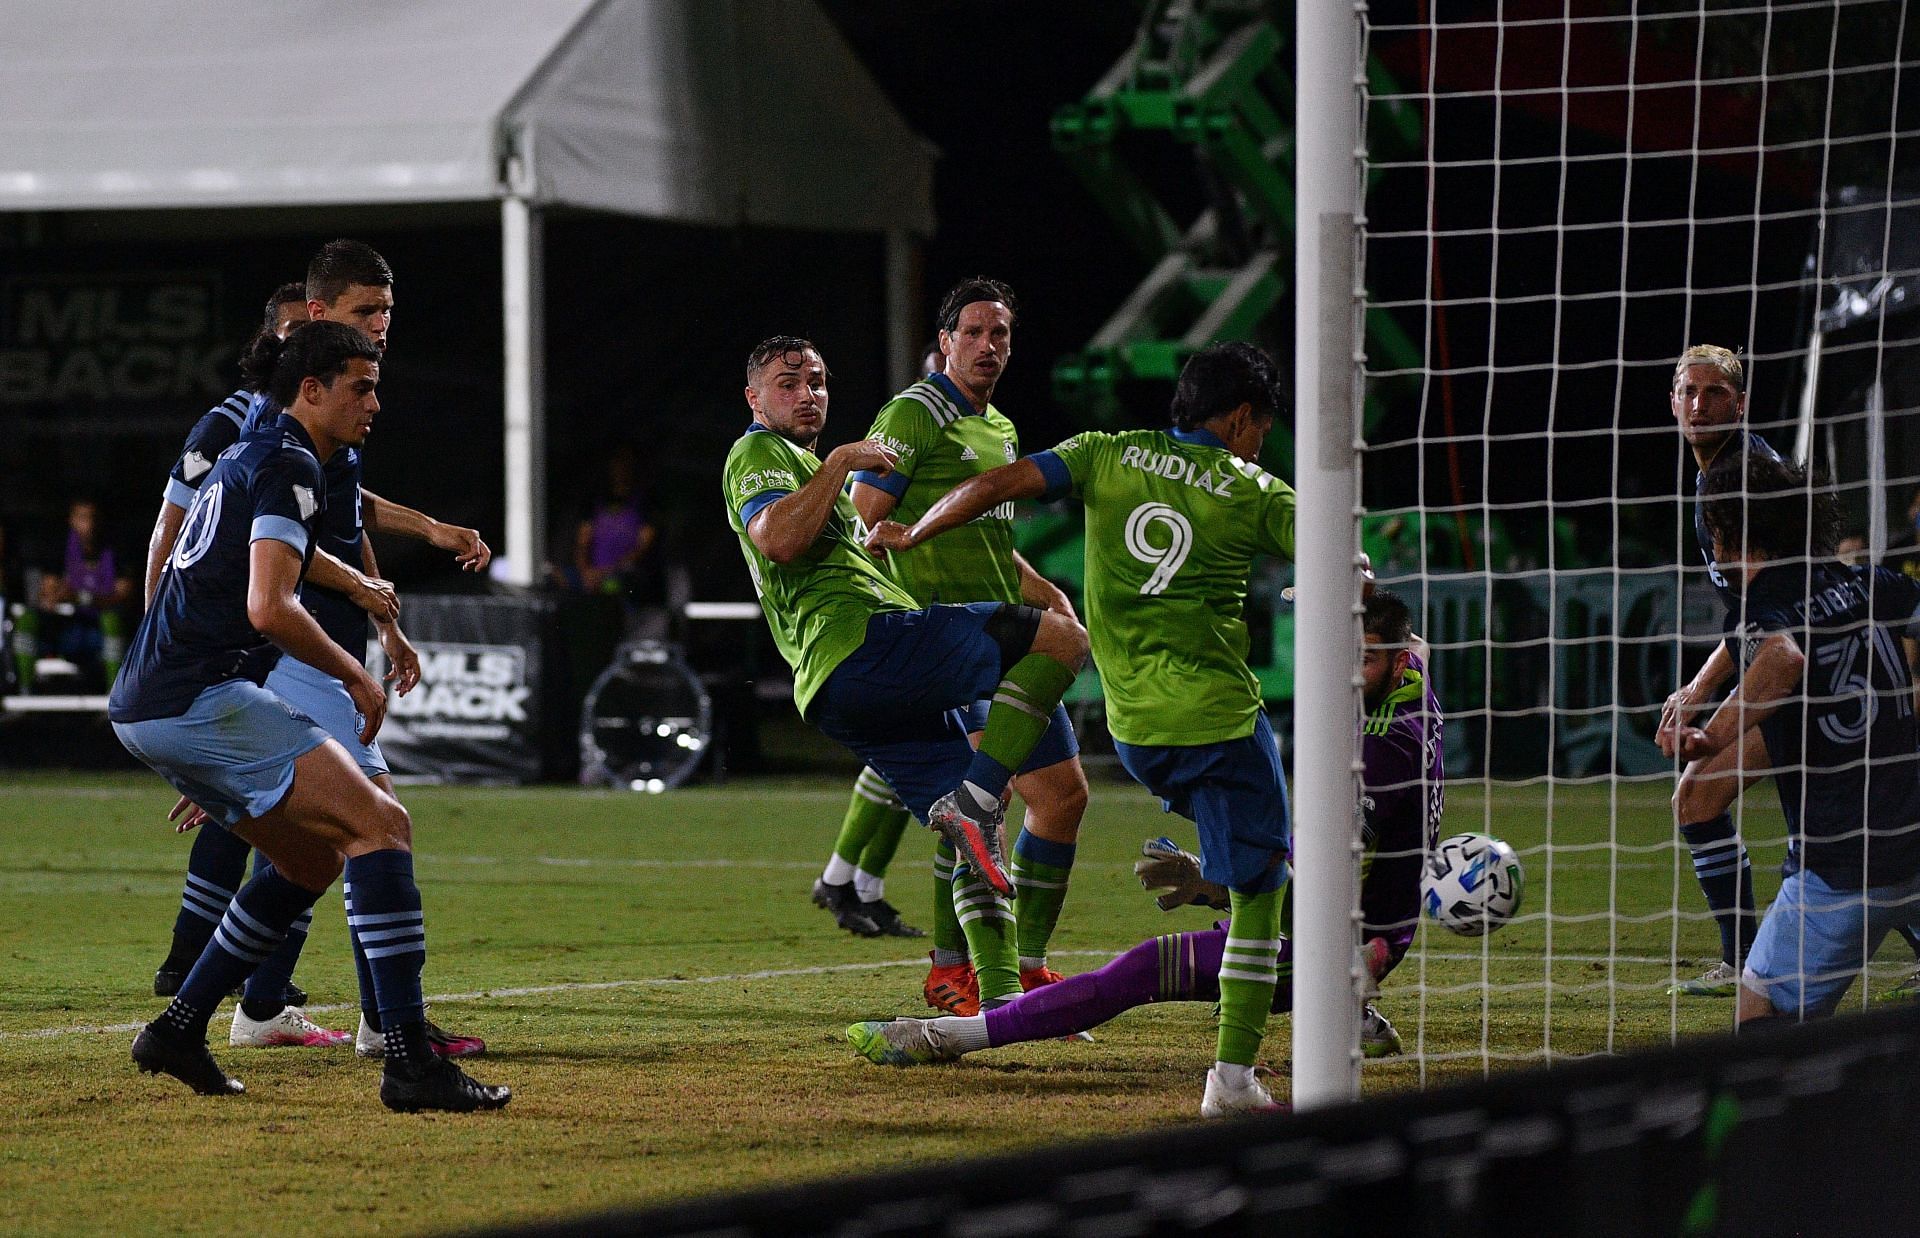 Seattle Sounders take on Vancouver Whitecaps this week